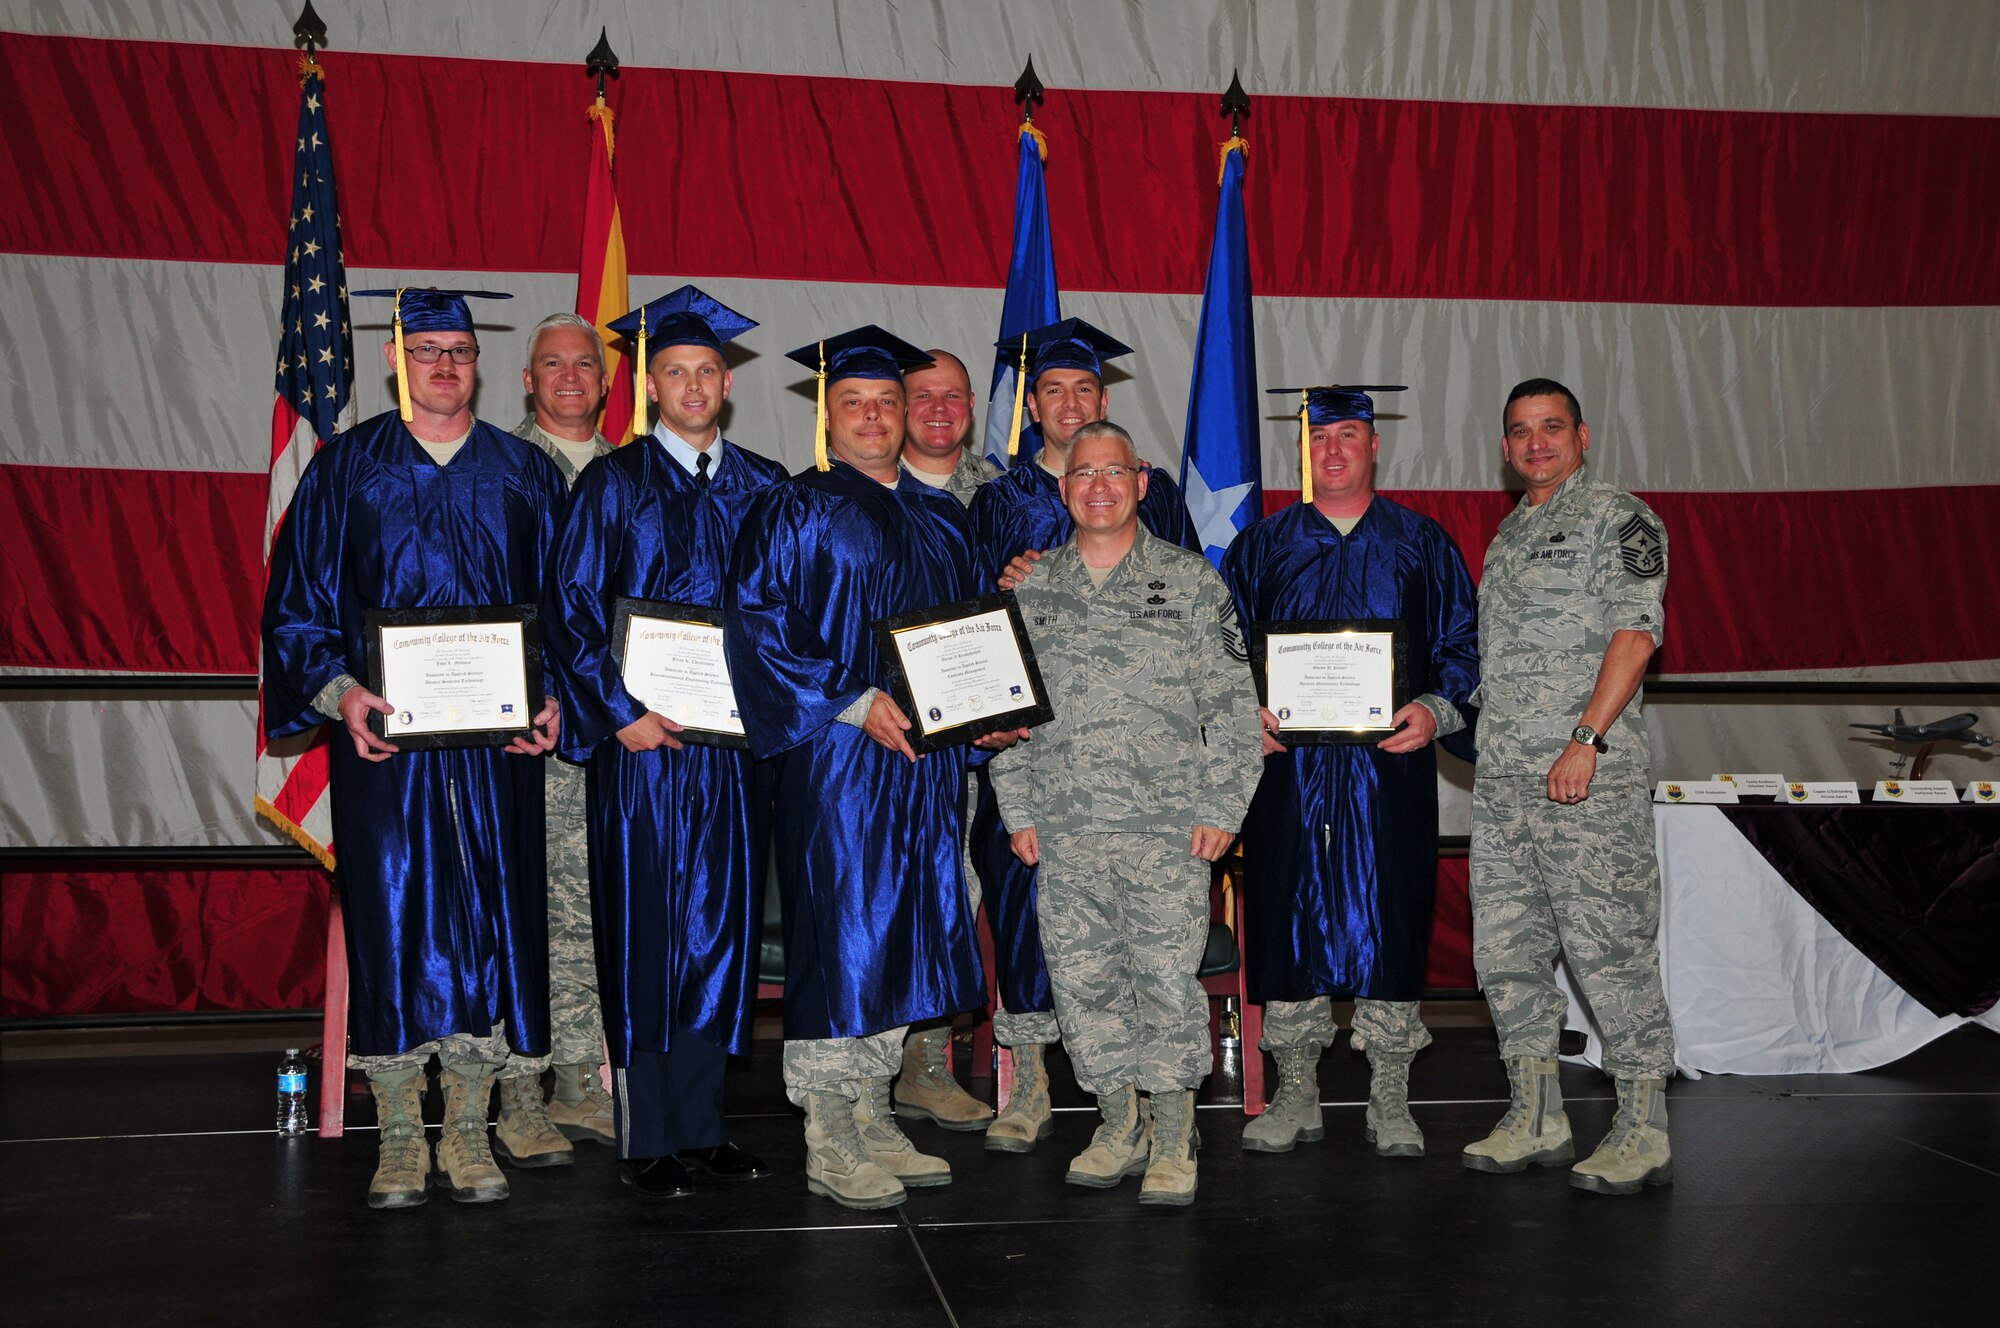 Airmen who have graduated from the Community College of the Air Force are recognized during a wing wide ceremony at the 161st Air Refueling Wing, Phoenix, May 3, 2014. The ceremony recognized the 161 ARW’s Outstanding Airmen of the Year, Air National Guard Flight Crew Flight Equipment competition winner, recipients of the federal Meritorious Service Medal, Associate Degree recipients from the Community College of the Air Force and a recipient of the Air Medal. In addition, the Albert Leo Burns Trophy, the Hugh P. Kelly Memorial Award and the Copper 5 Award were awarded. (U.S. Air National Guard Photo by Staff Sgt. Courtney Enos/Released)